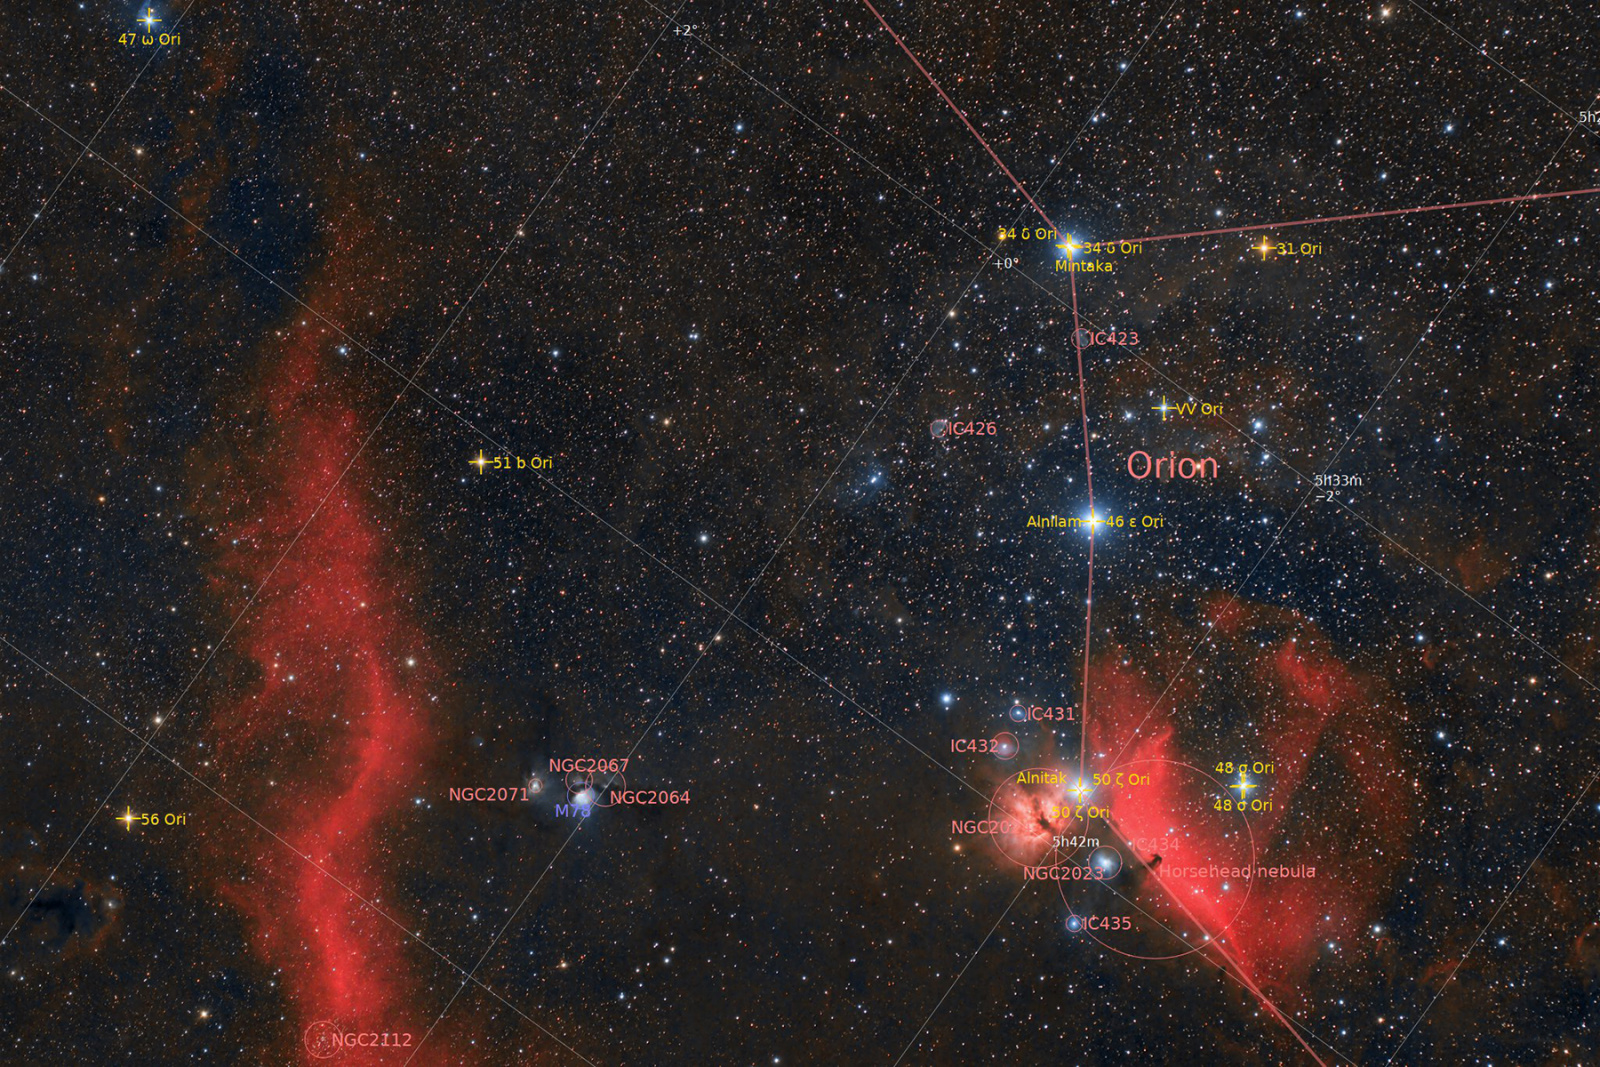 Orion_RedCat_51_250mm_Annotated.jpg